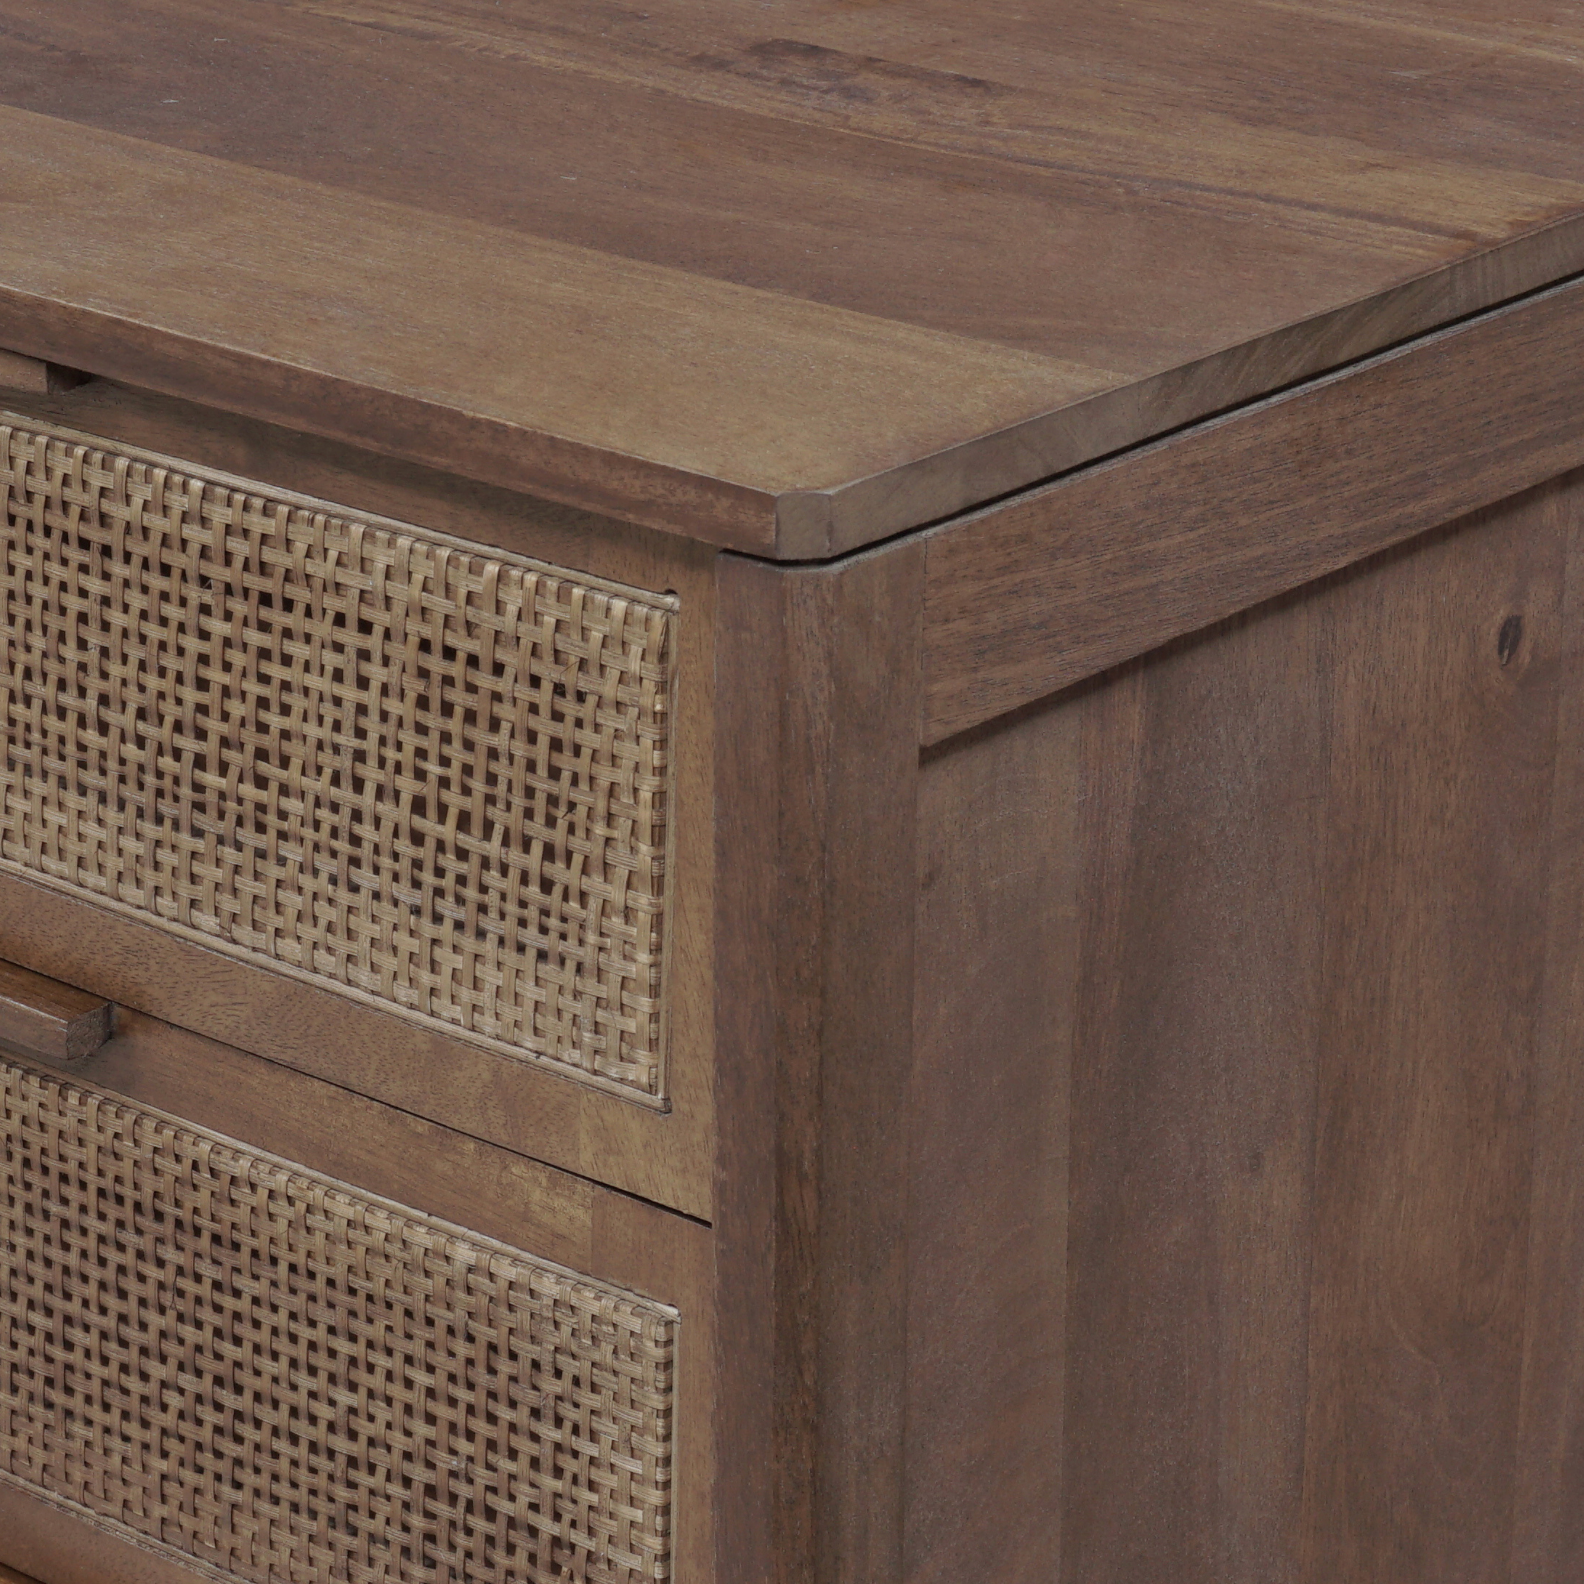 Brown wash mango frames inset woven cane, for a light, textural look with organic allure. Three spacious drawers provide plenty of closed storage. Amethyst Home provides interior design, new construction, custom furniture and area rugs in the Austin metro area